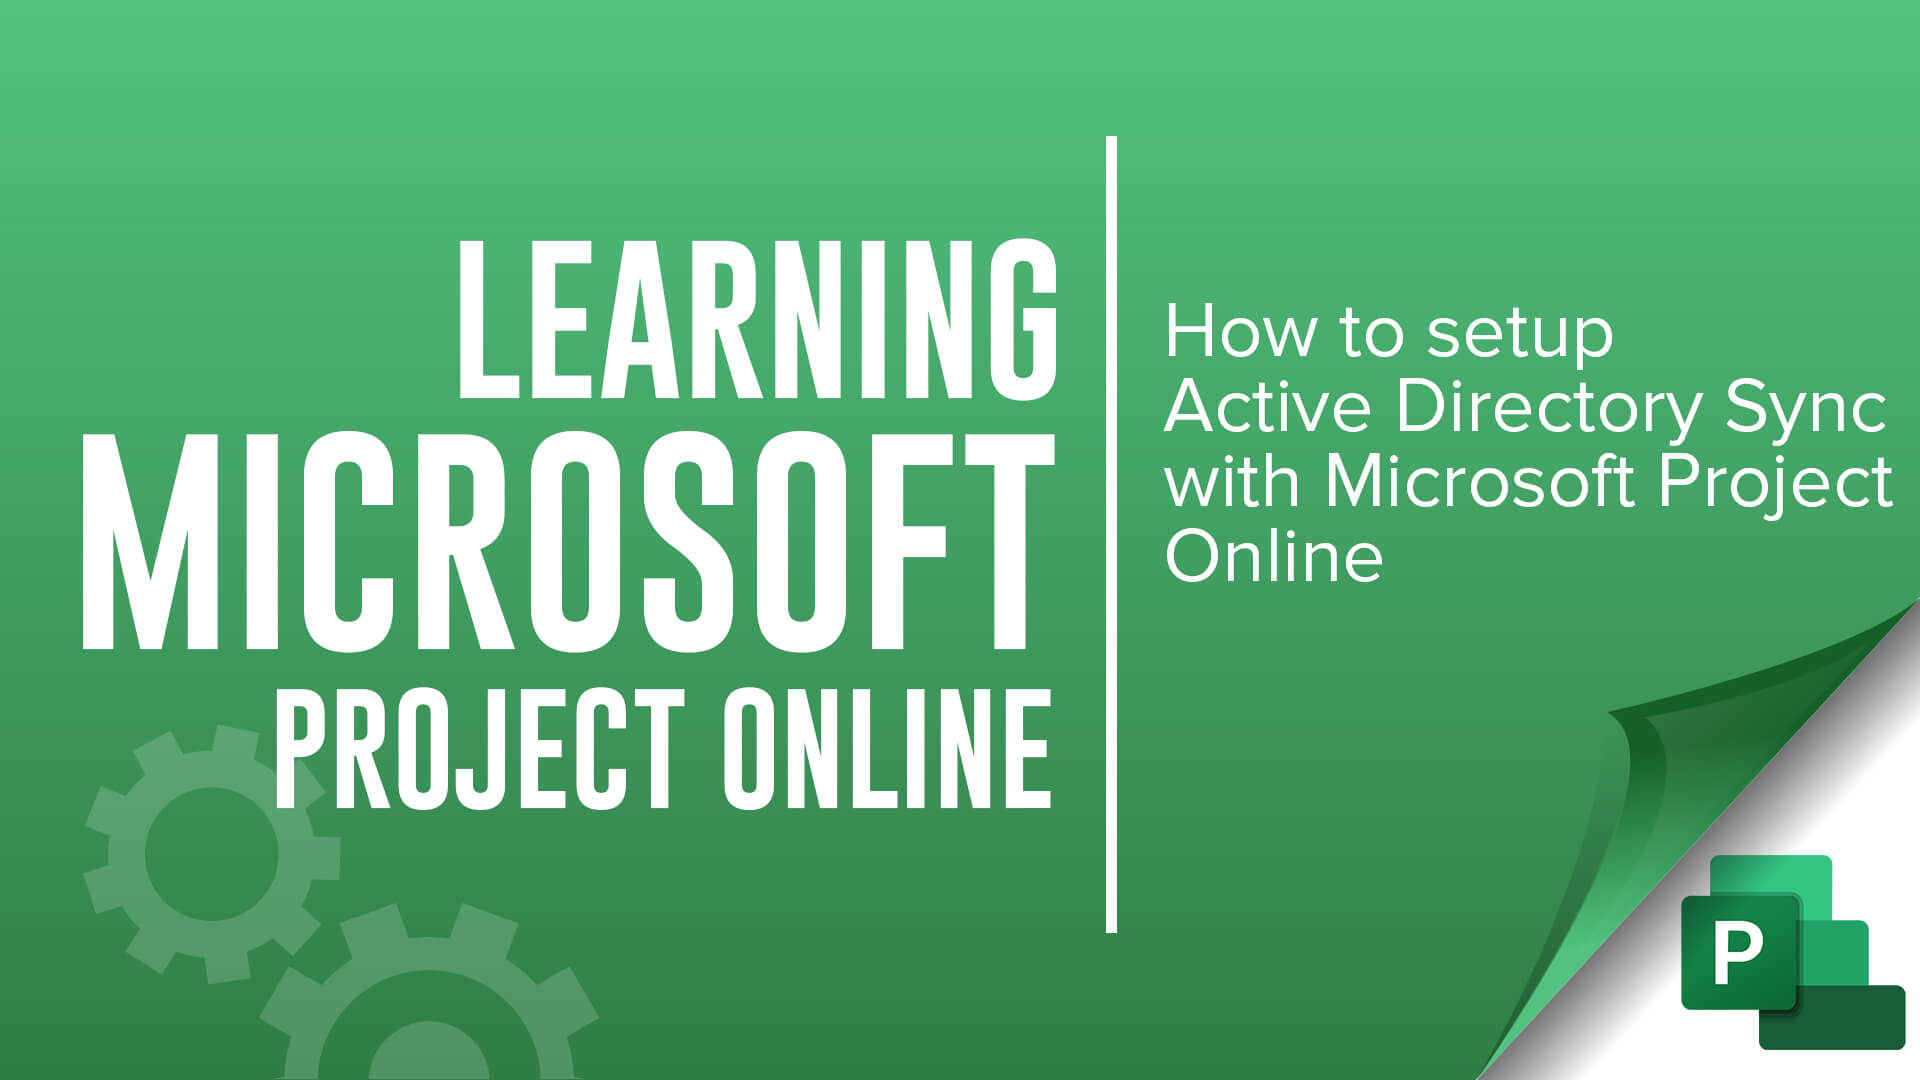 learning Microsoft Project Online - How to setup Active Directory Sync with Microsoft Project Online